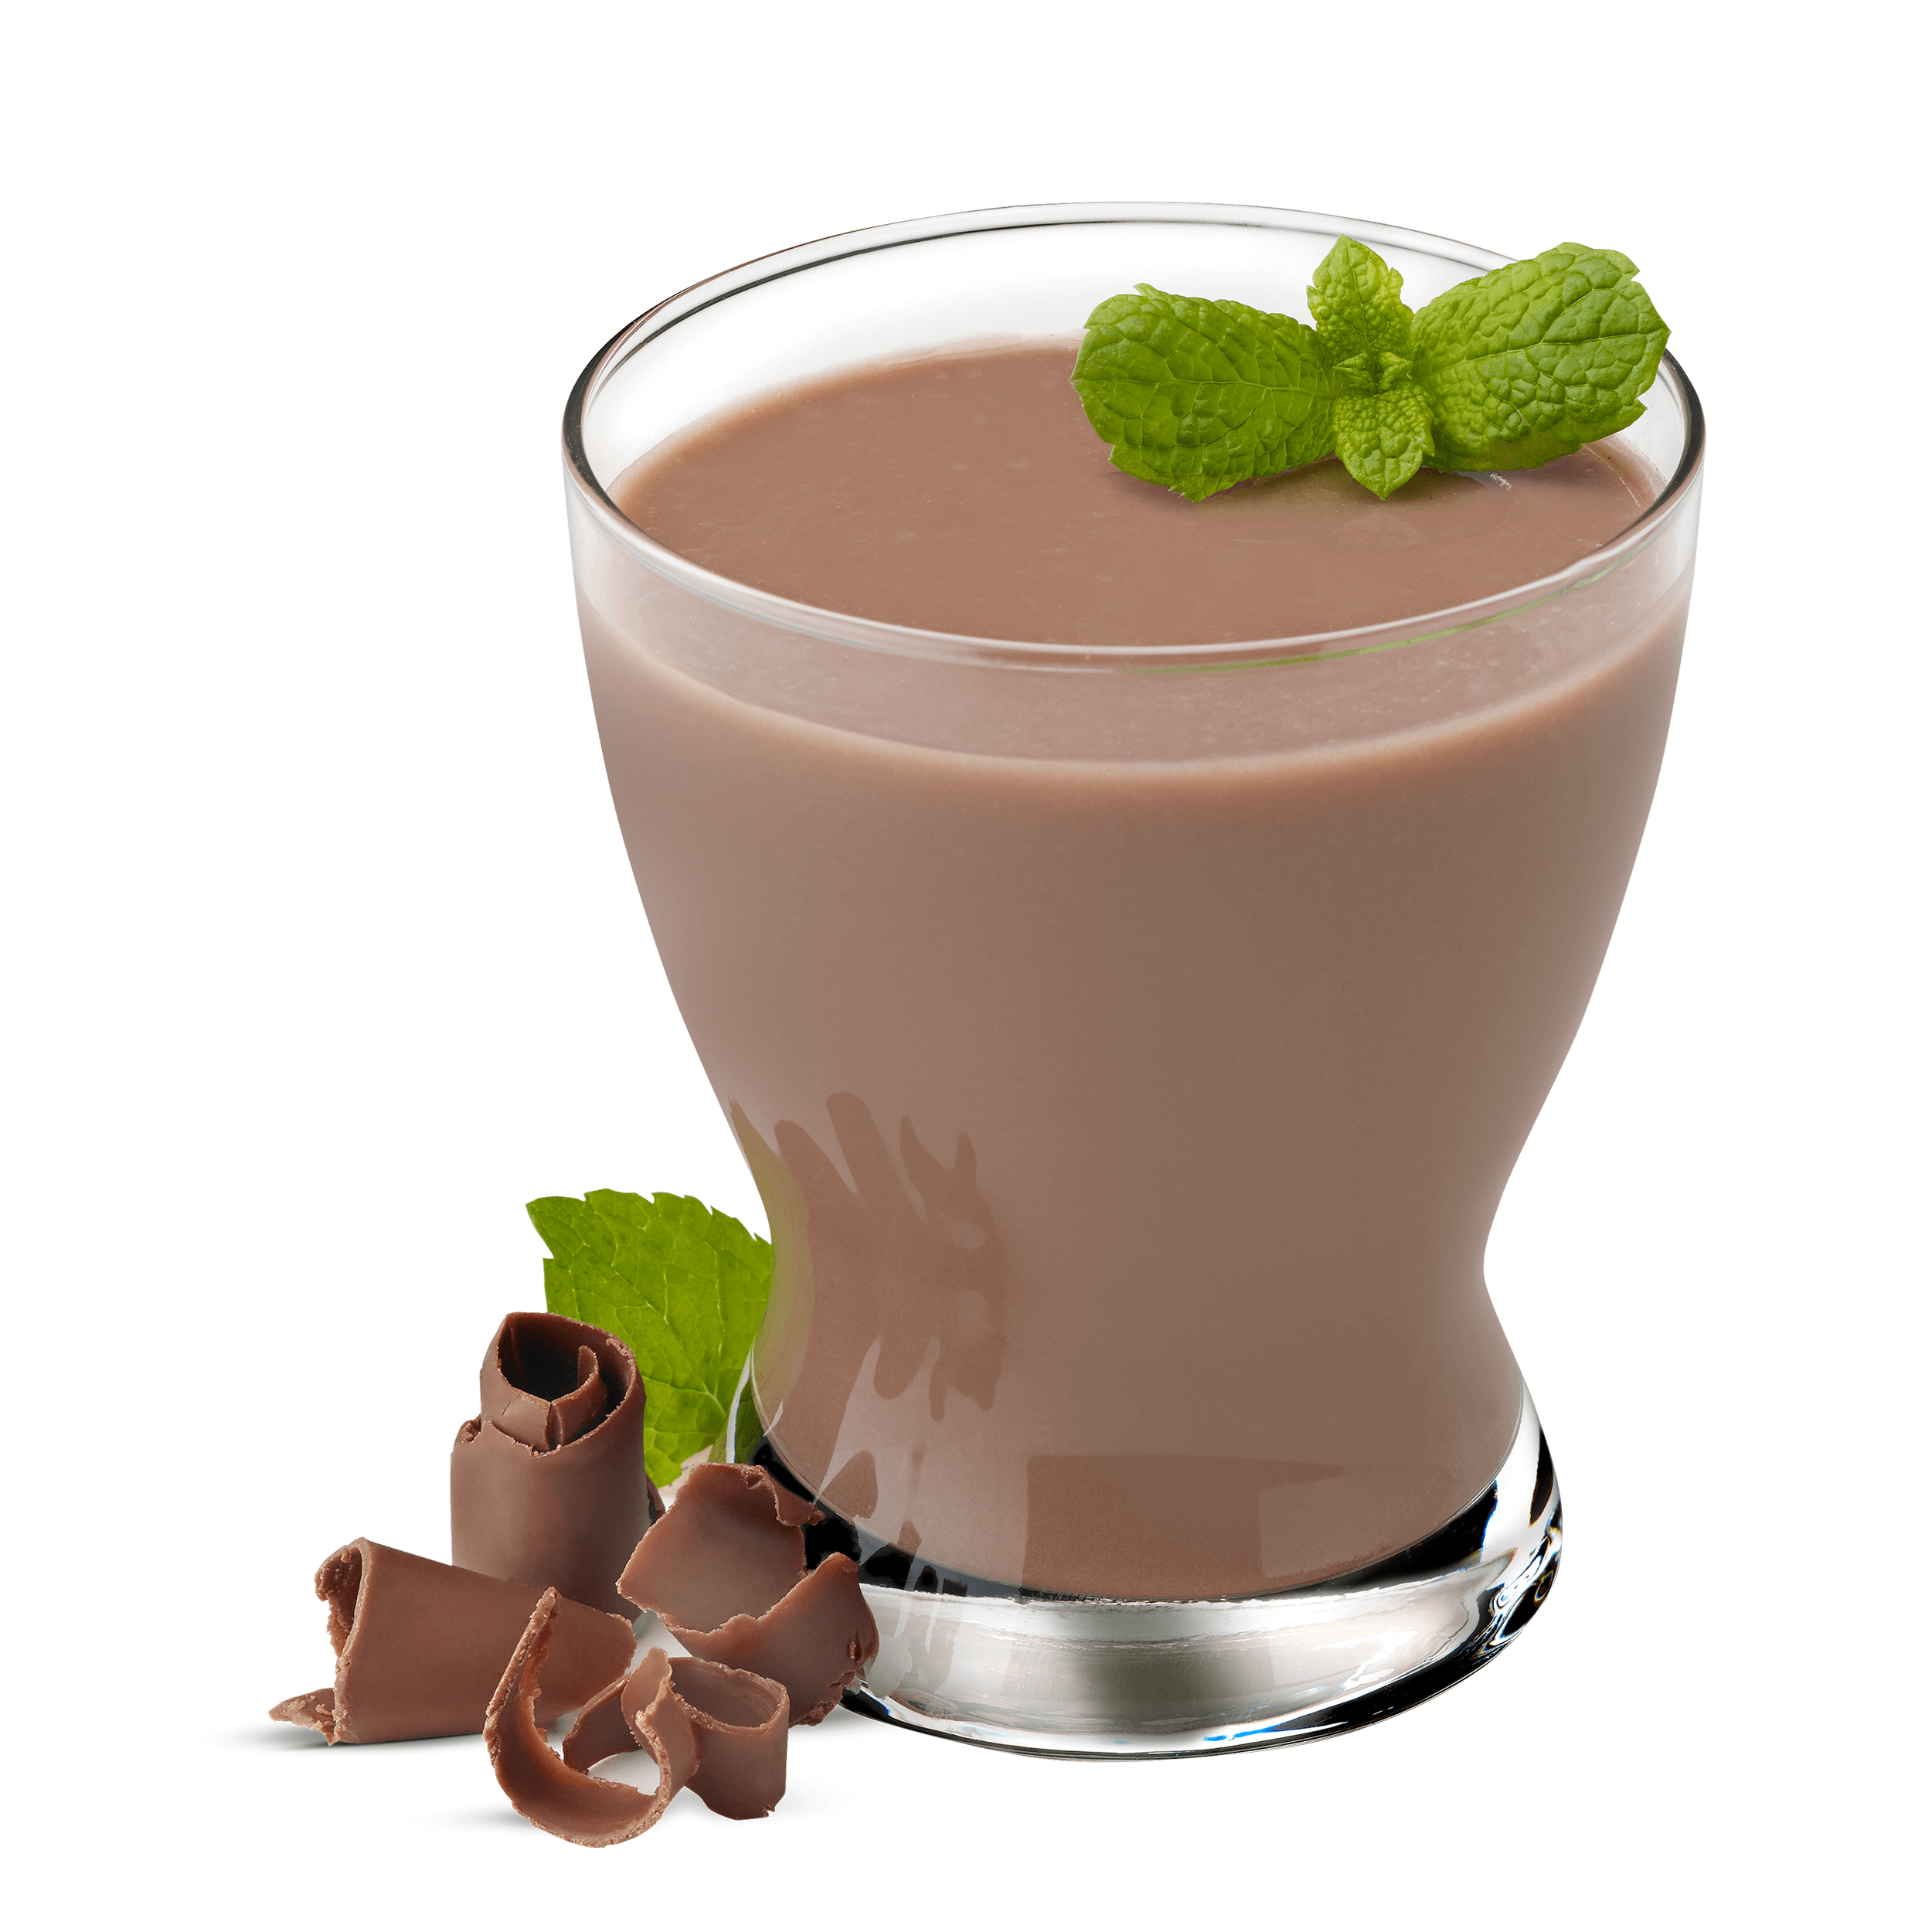 Image of Biocare Semaglutide nausea relief chococlae beverage in a glass for ozempic side effects